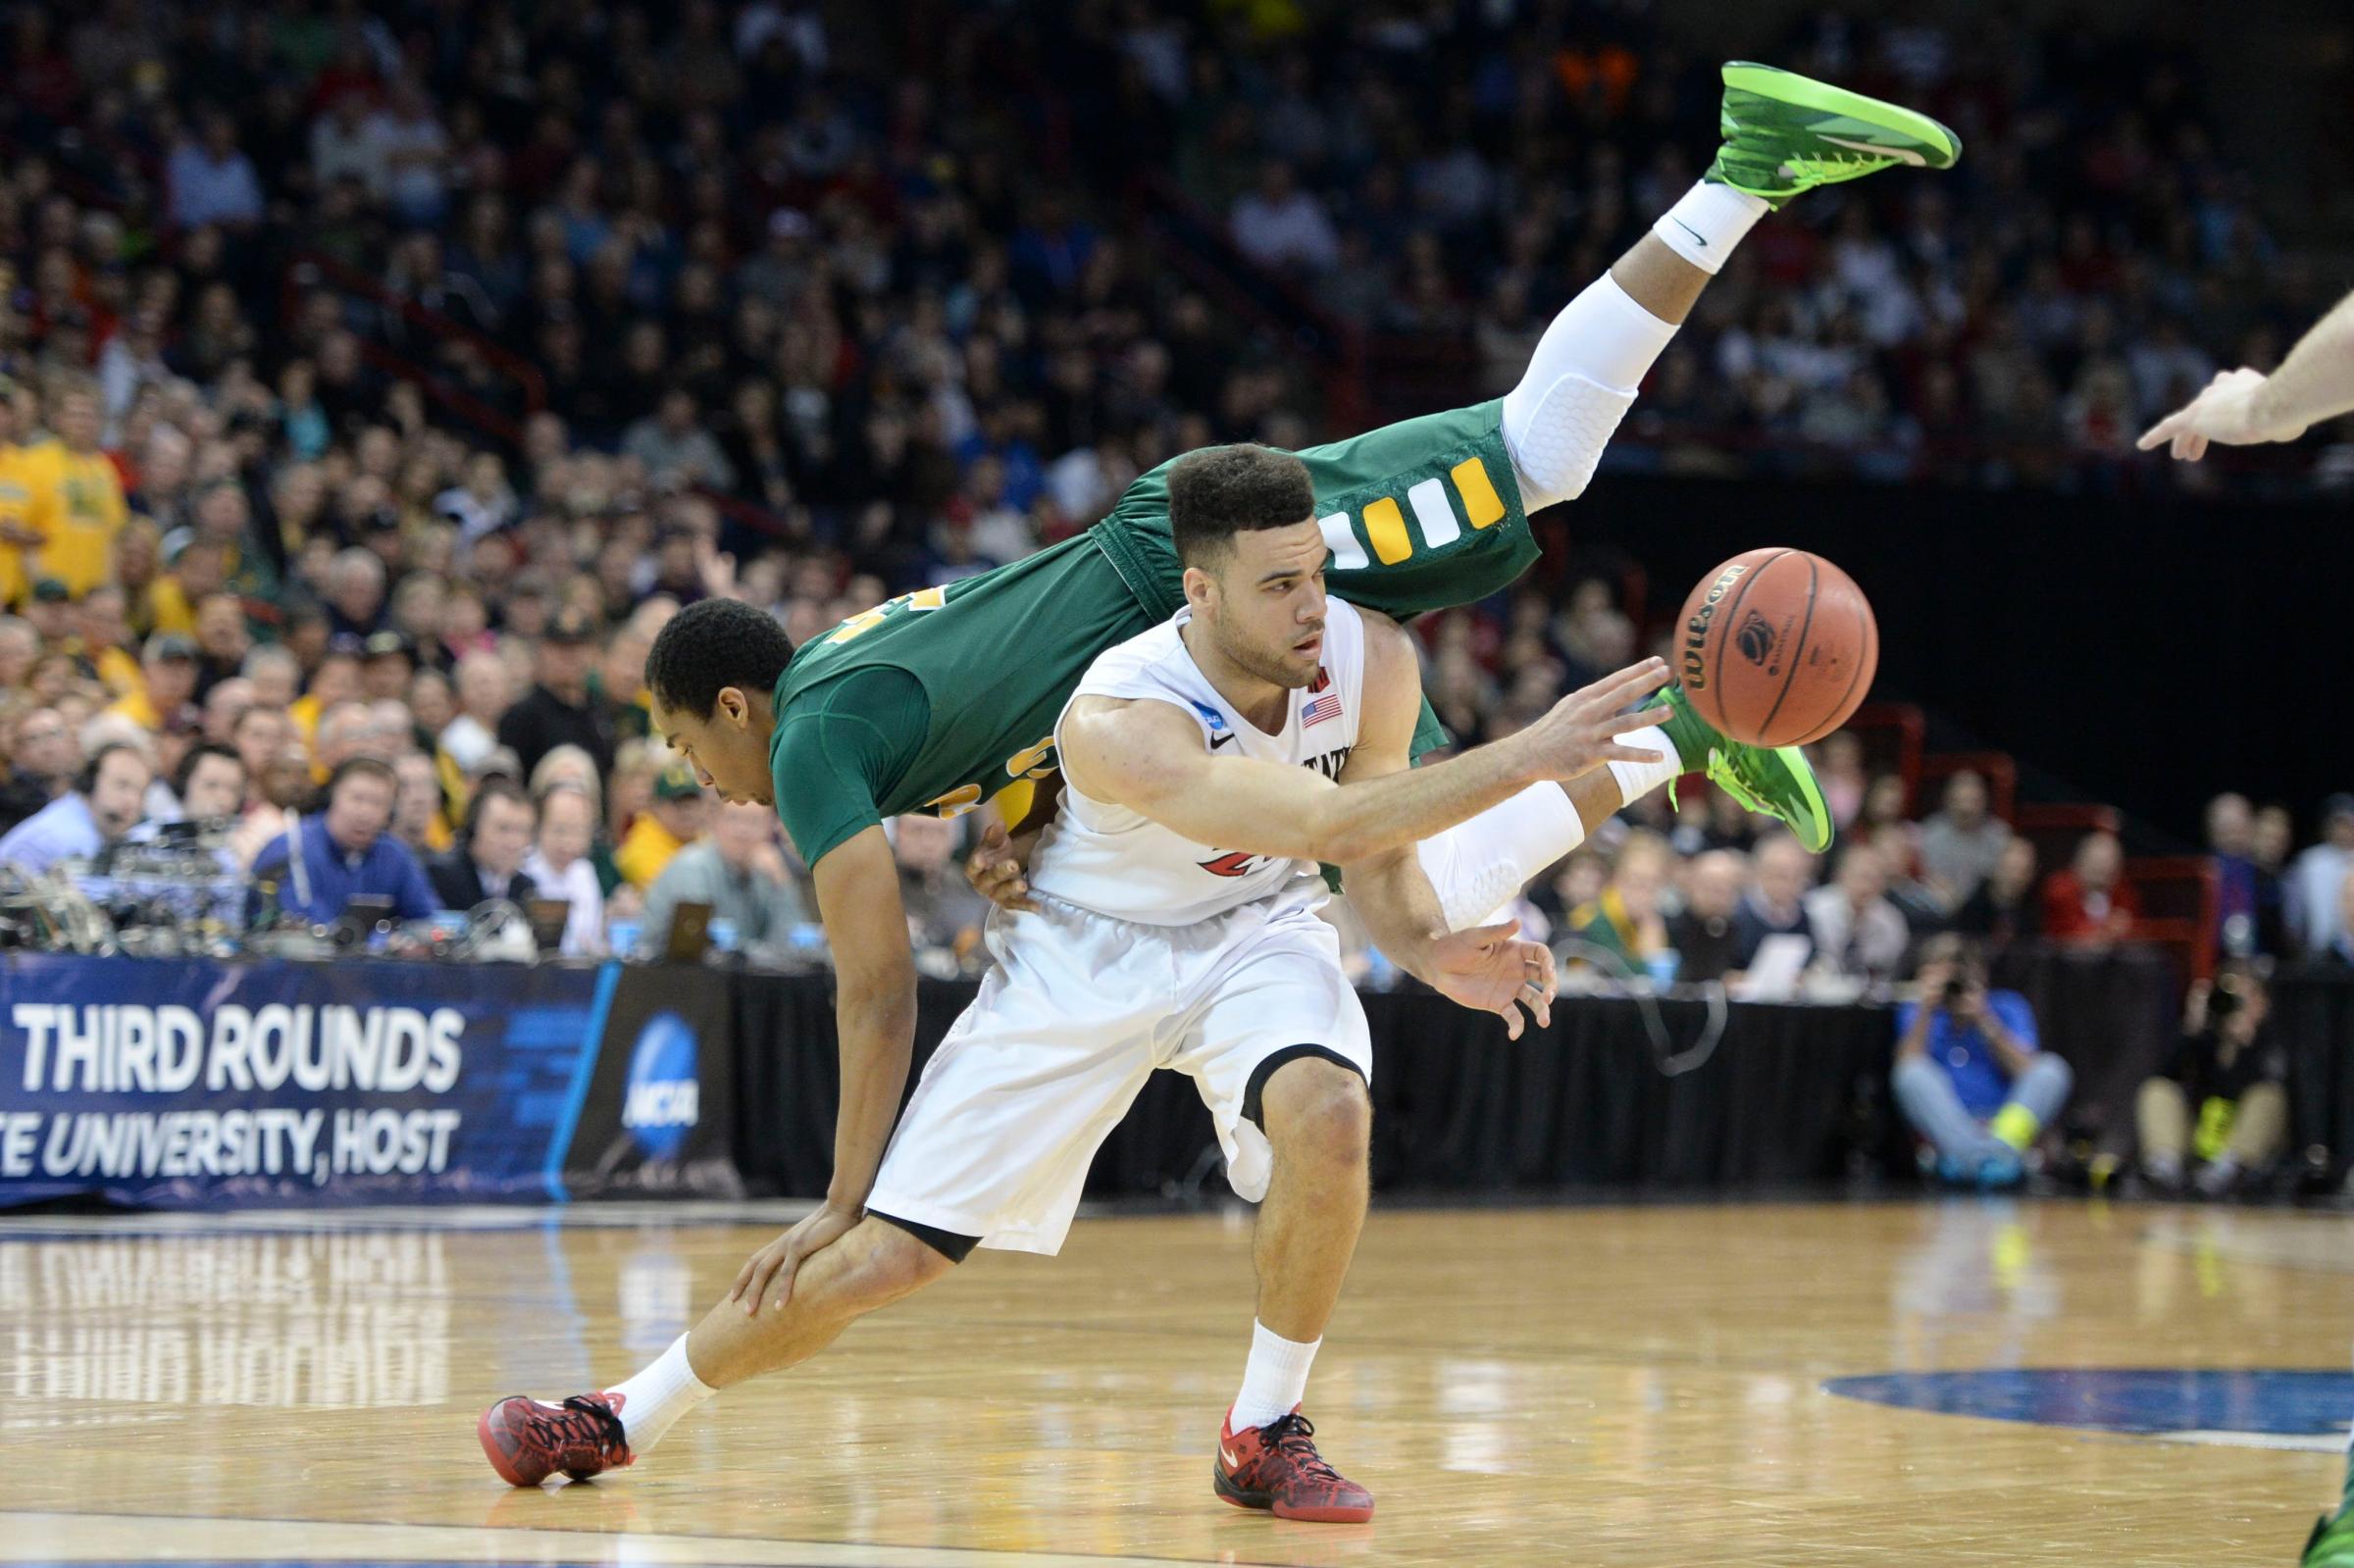 North Dakota State Bison guard Lawrence Alexander falls over San Diego State Aztecs forward JJ O'Brien in the second half of a men's college basketball game during the third round of the 2014 NCAA Tournament at Veterans Memorial Arena, March 22, 2014.